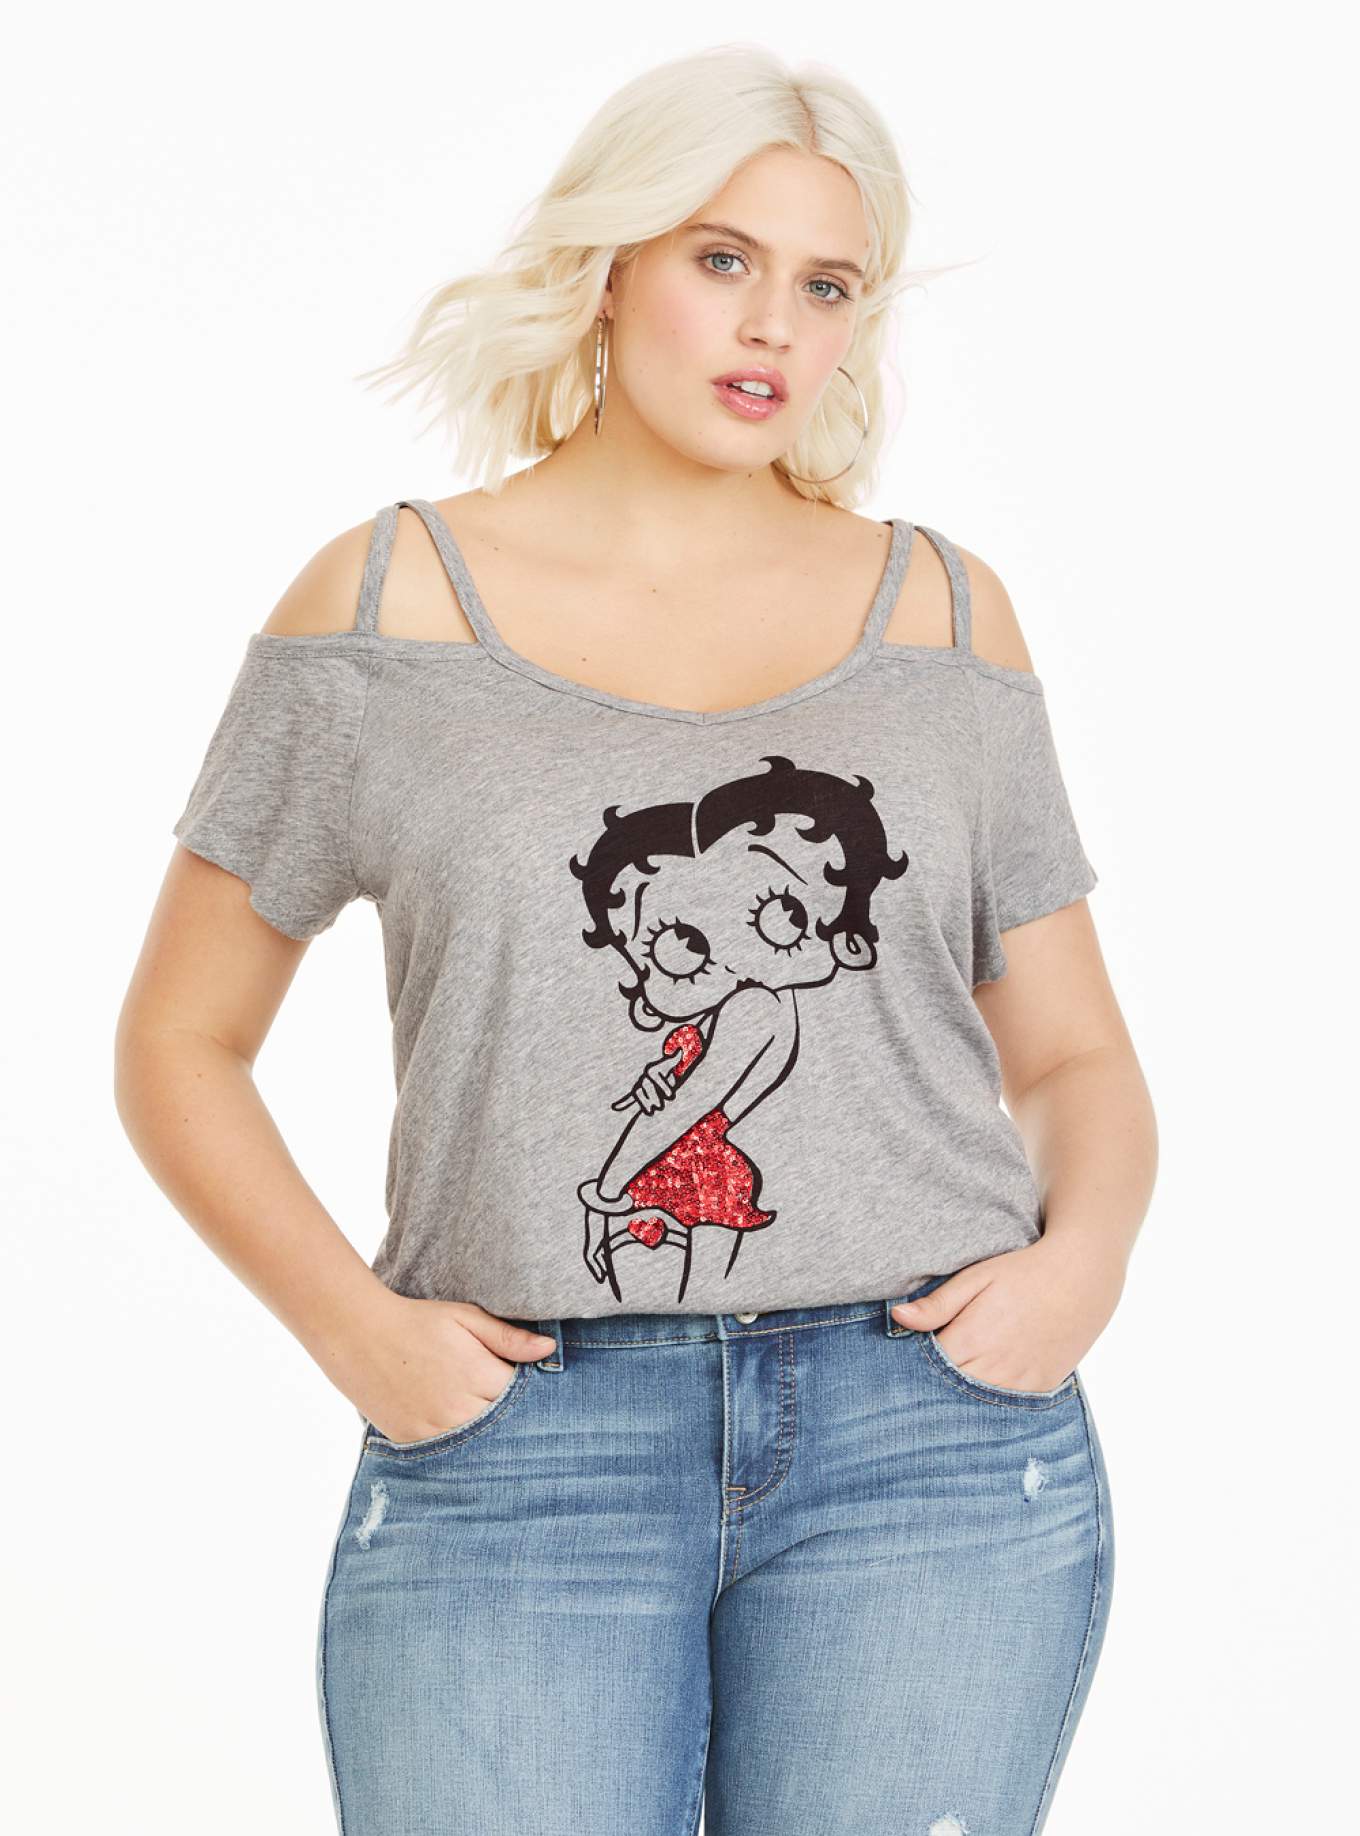 Torrid x Betty Boop X Project Runway Collection